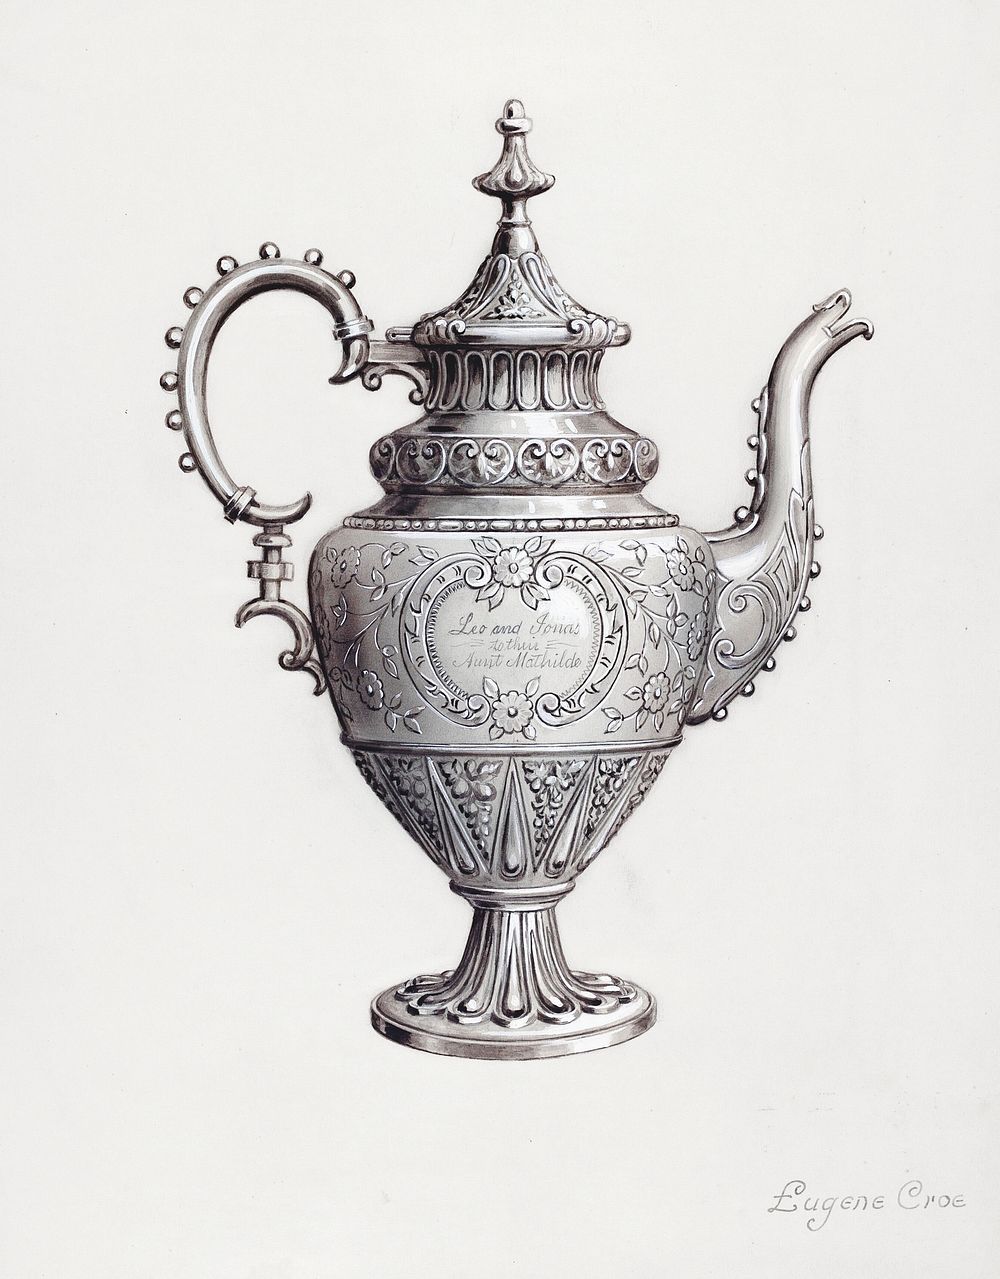 Silver Teapot (ca.1936) by Eugene Croe. Original from The National Gallery of Art. Digitally enhanced by rawpixel.